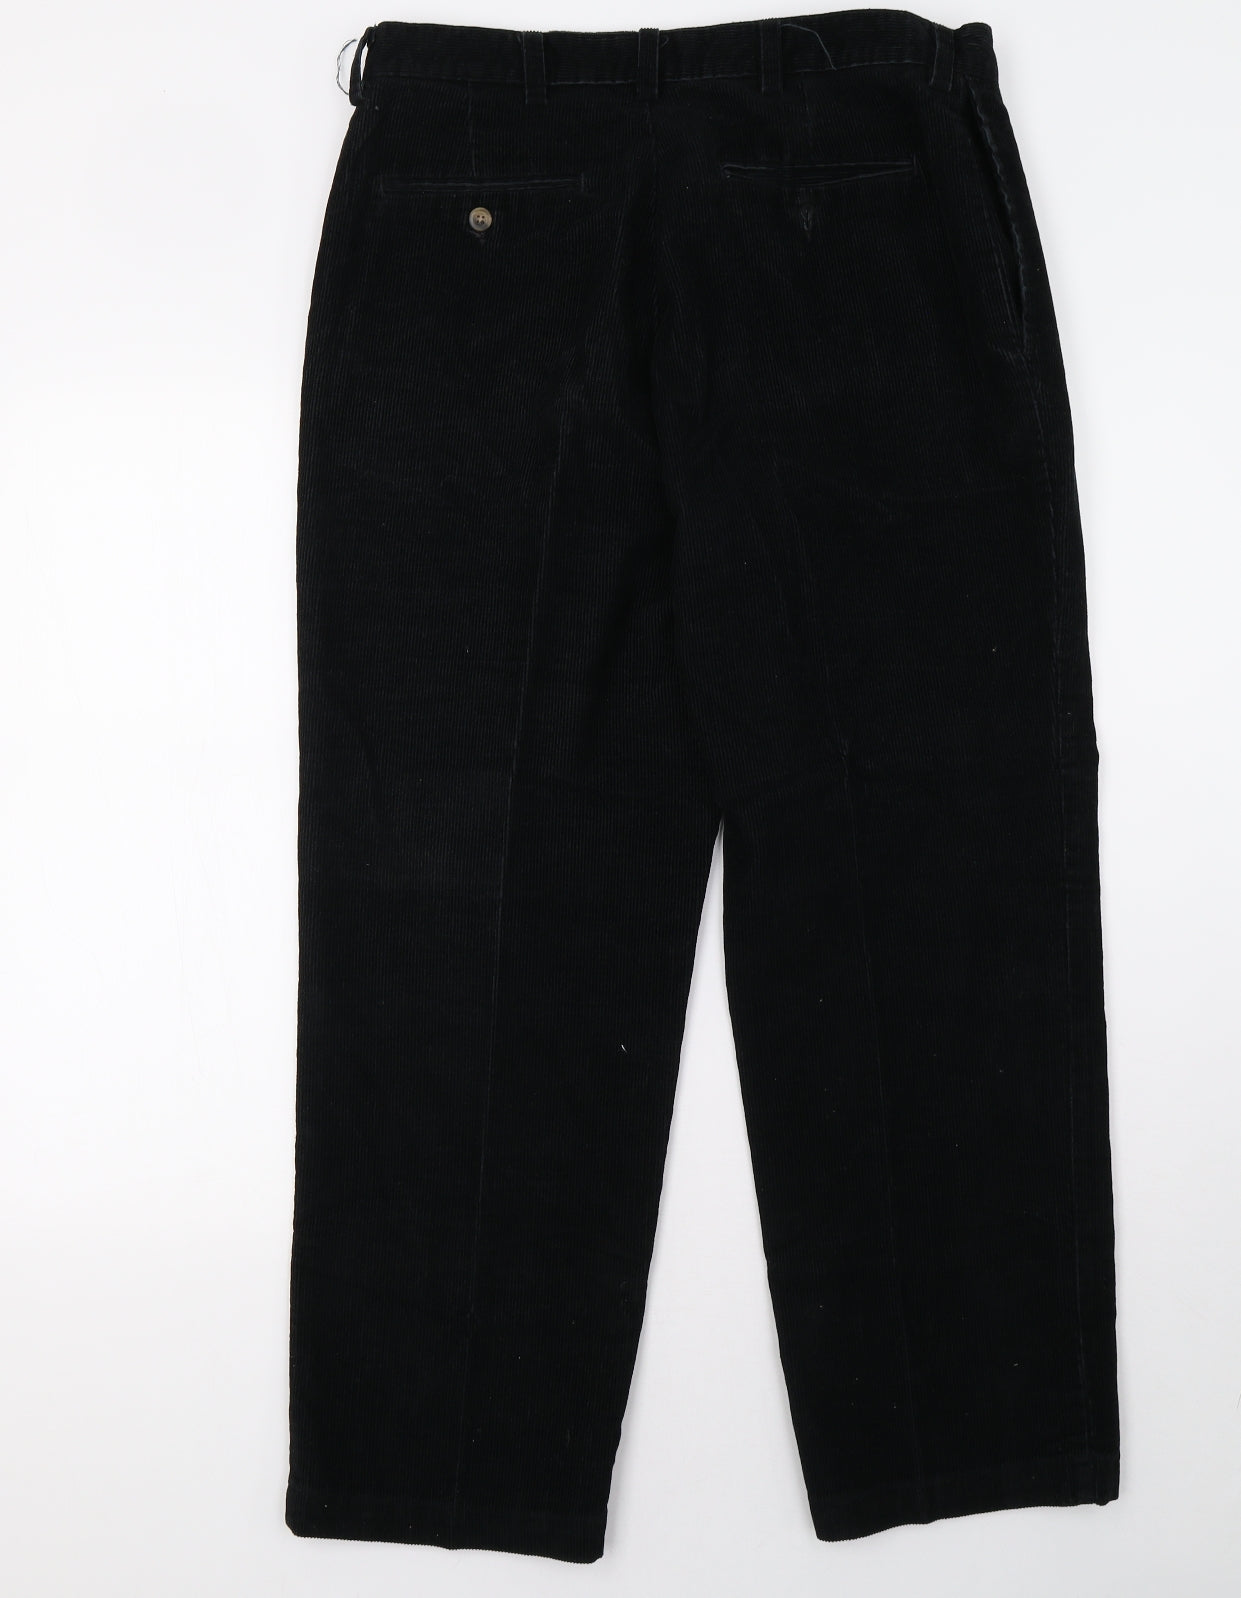 Haggar Womens Black   Trousers  Size 34 L29 in